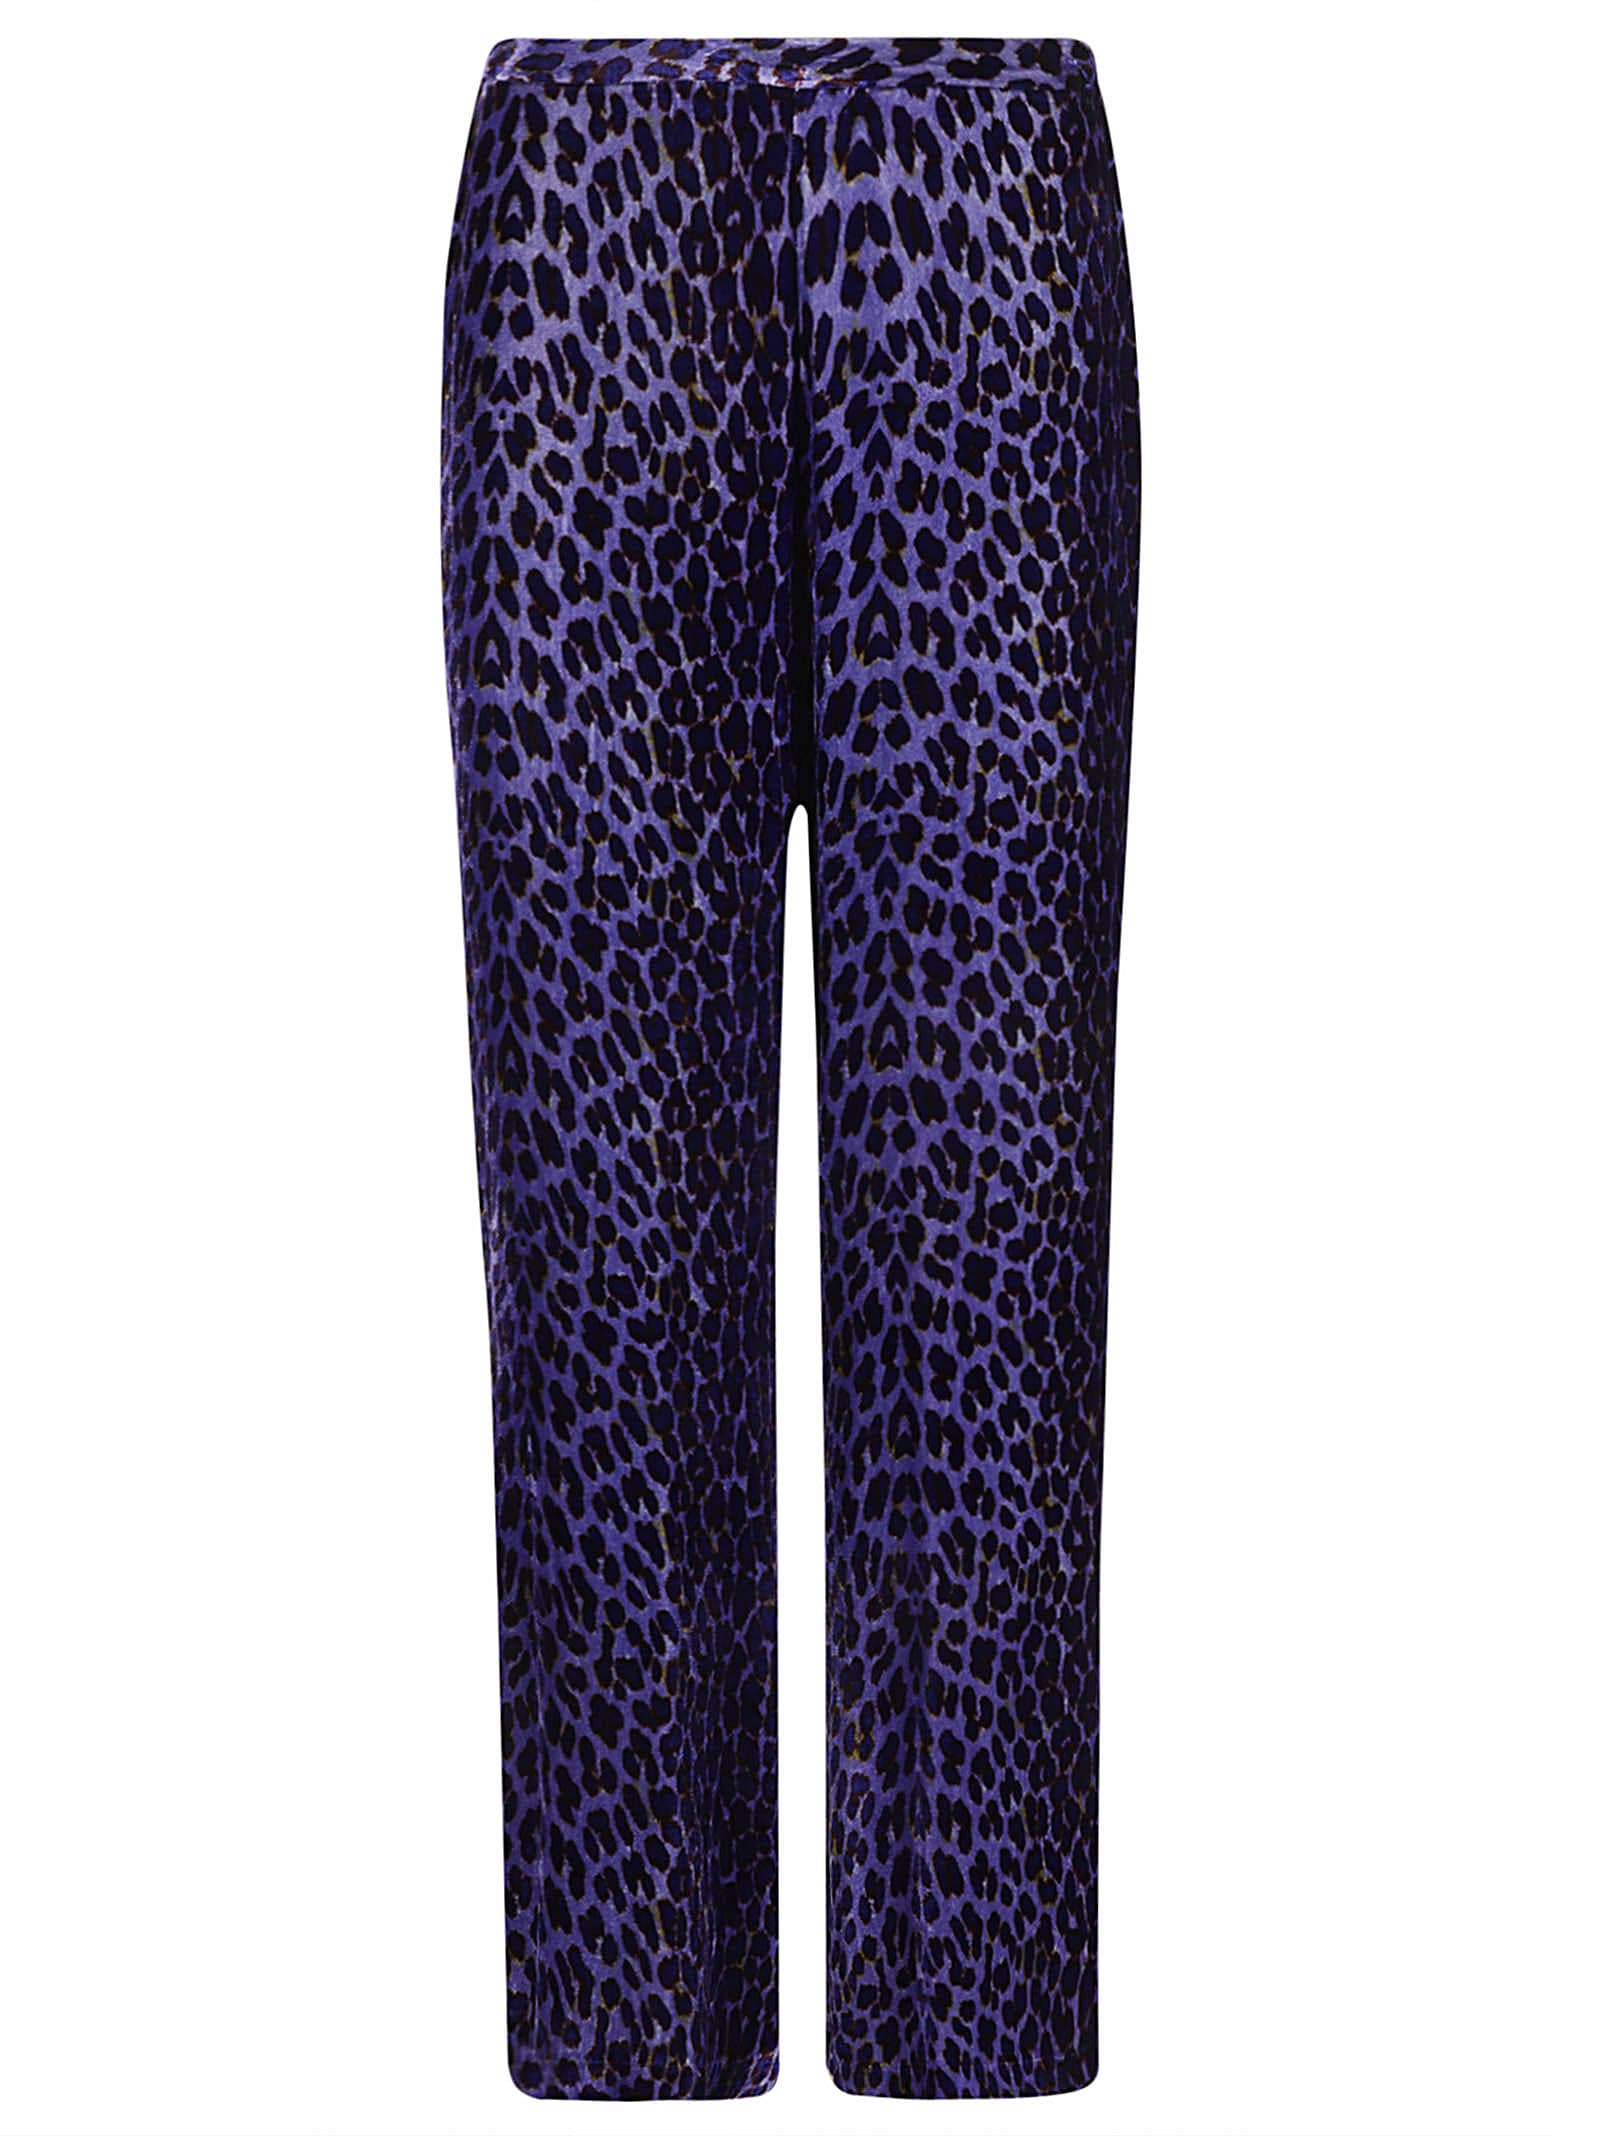 FORTE FORTE ANIMAL PRINT TROUSERS